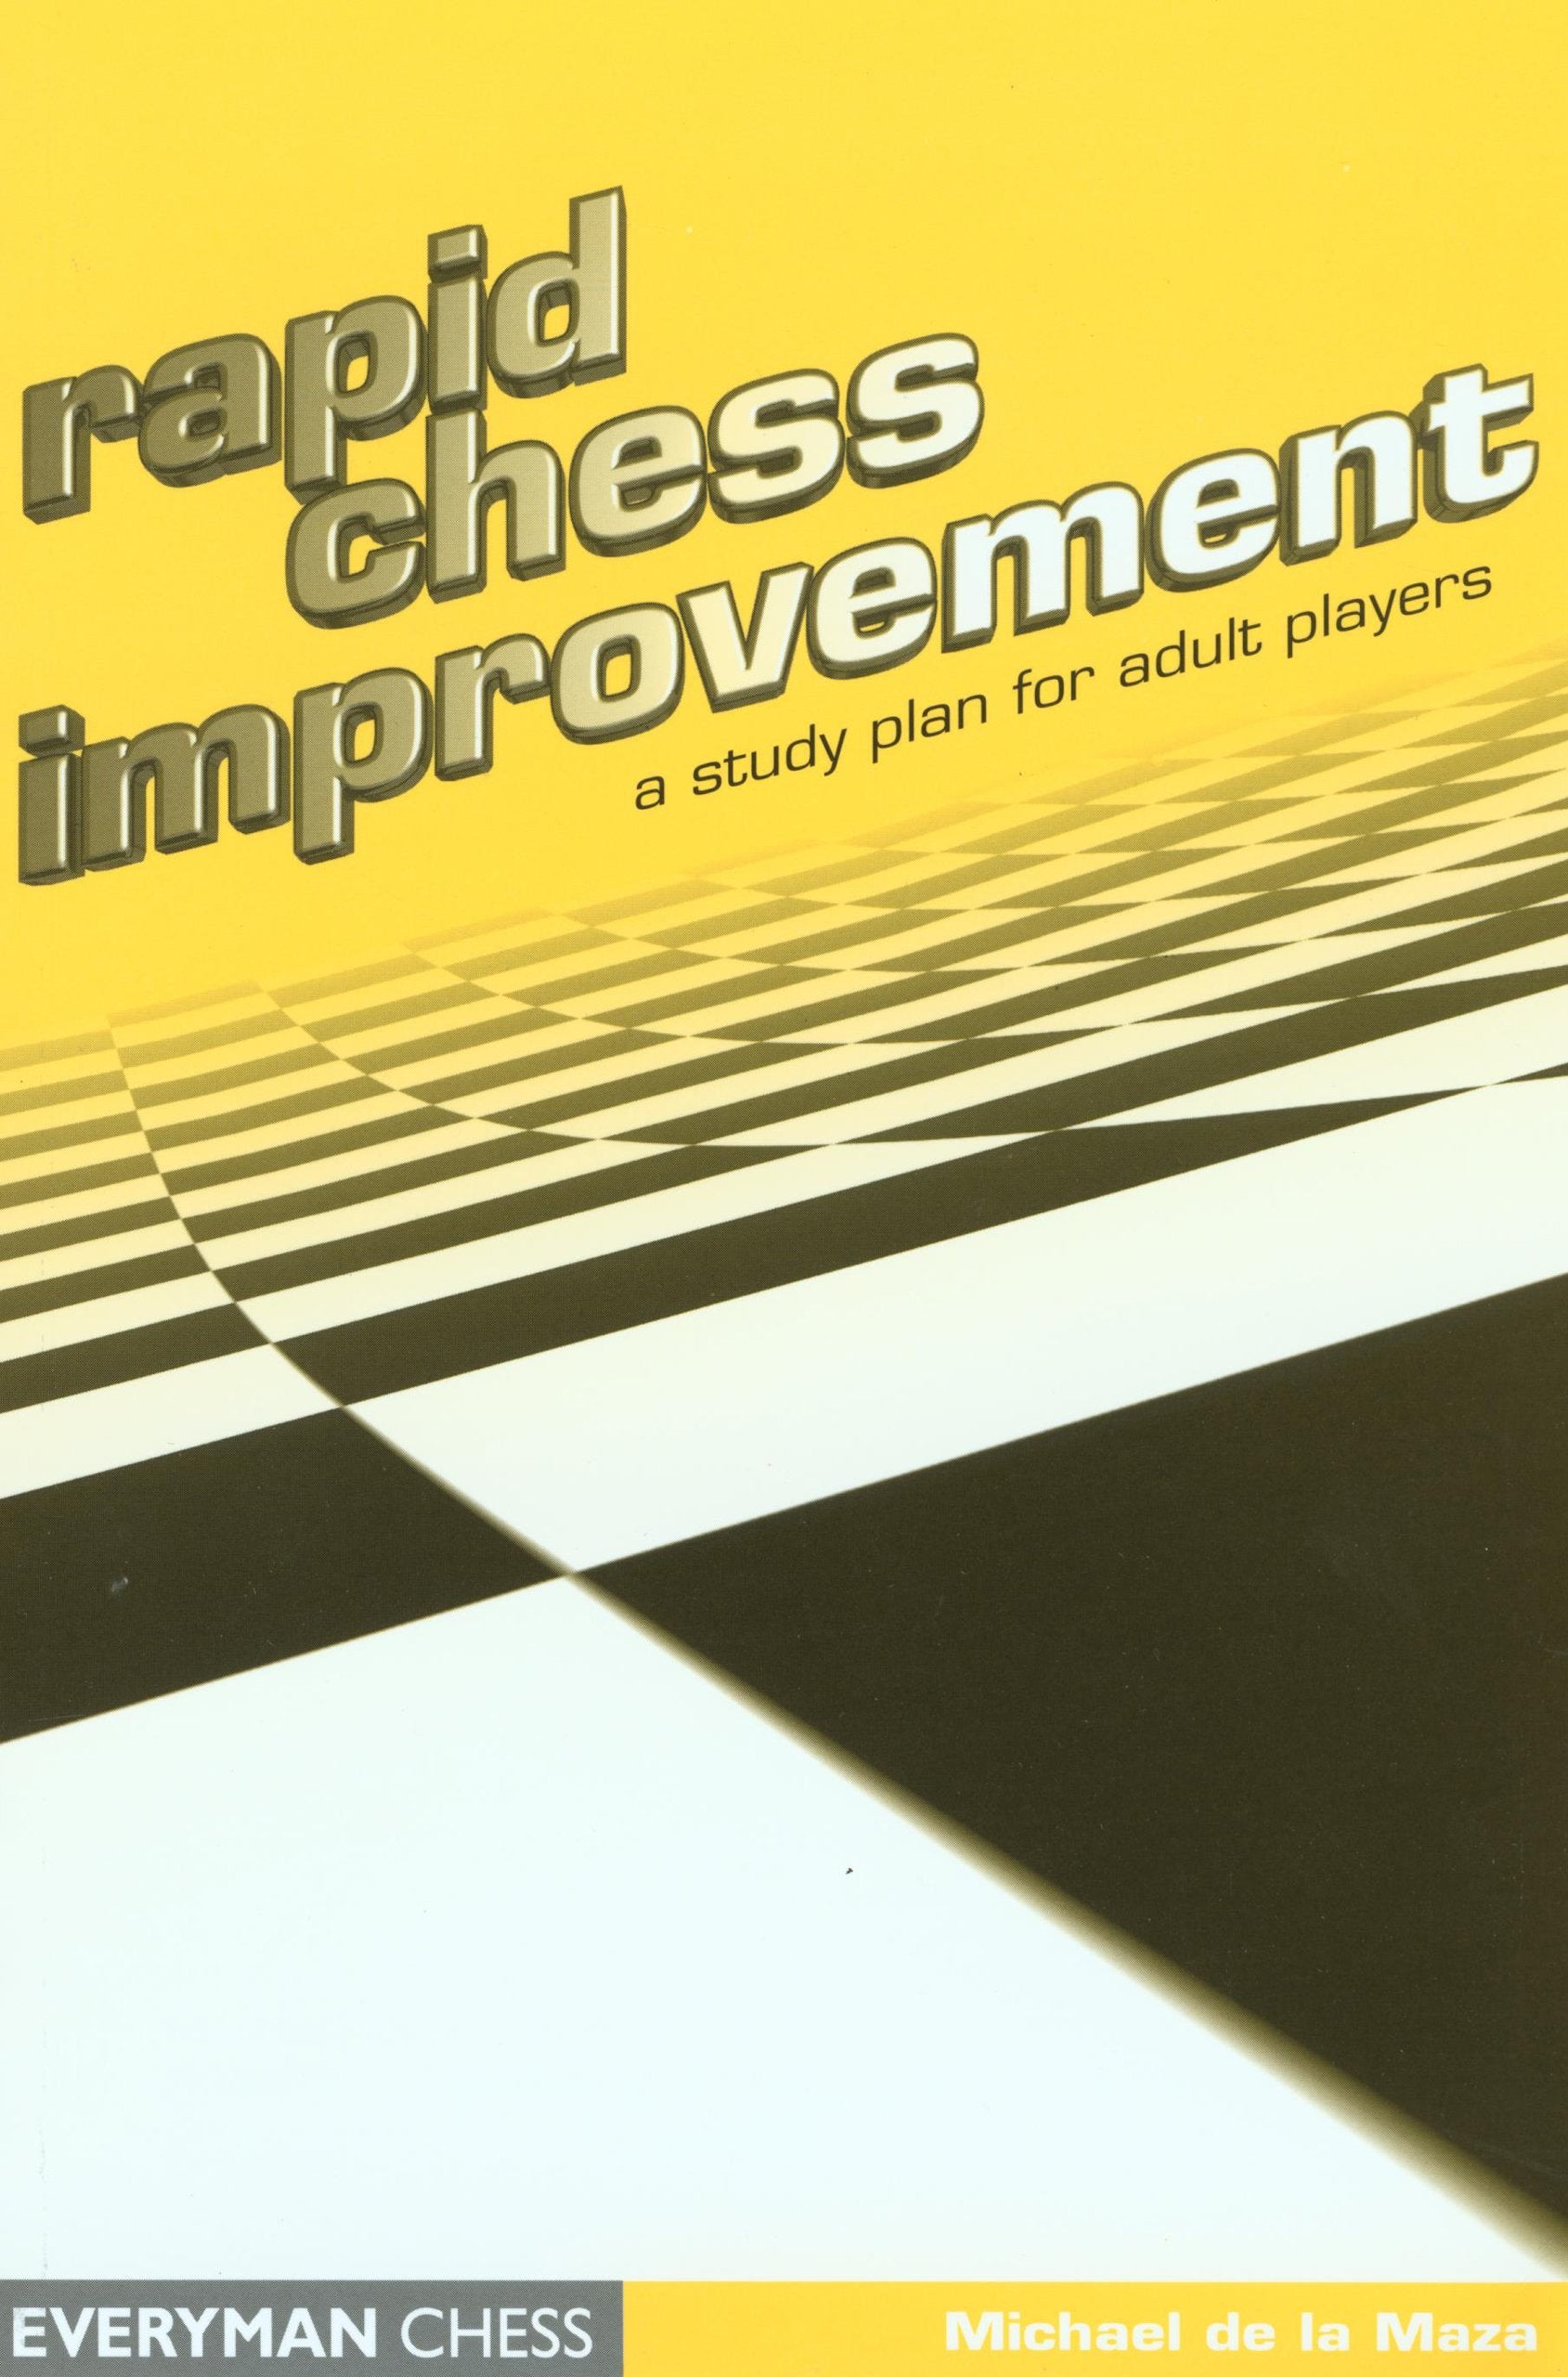 How To Get Better at Rapid Chess (Improvement Guide!)